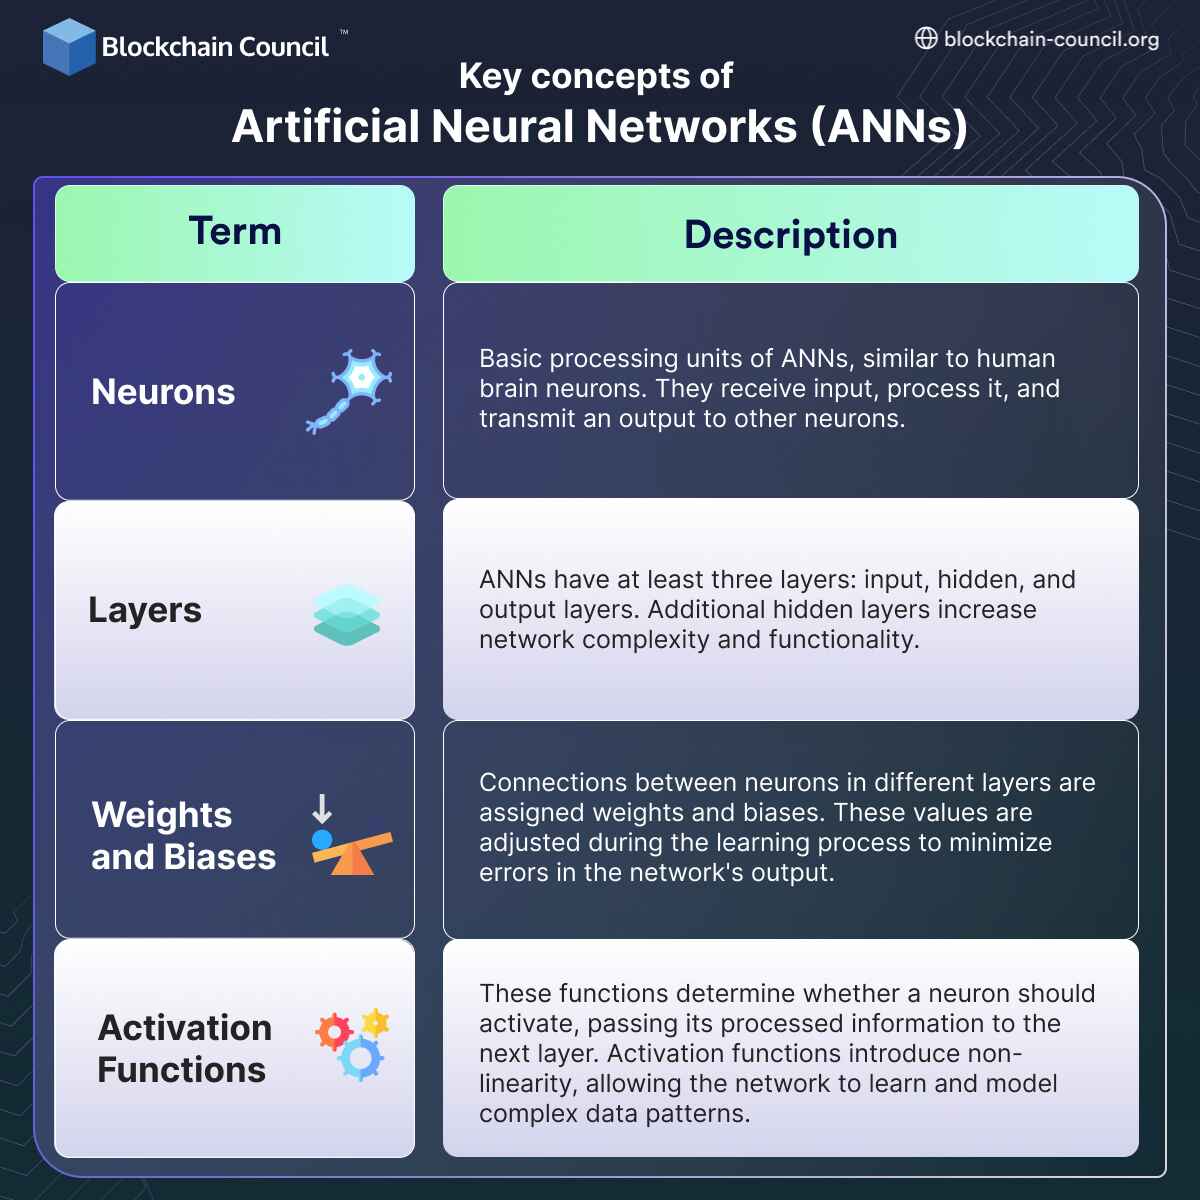 Key Concepts of Artificial Neural Networks (ANNs)